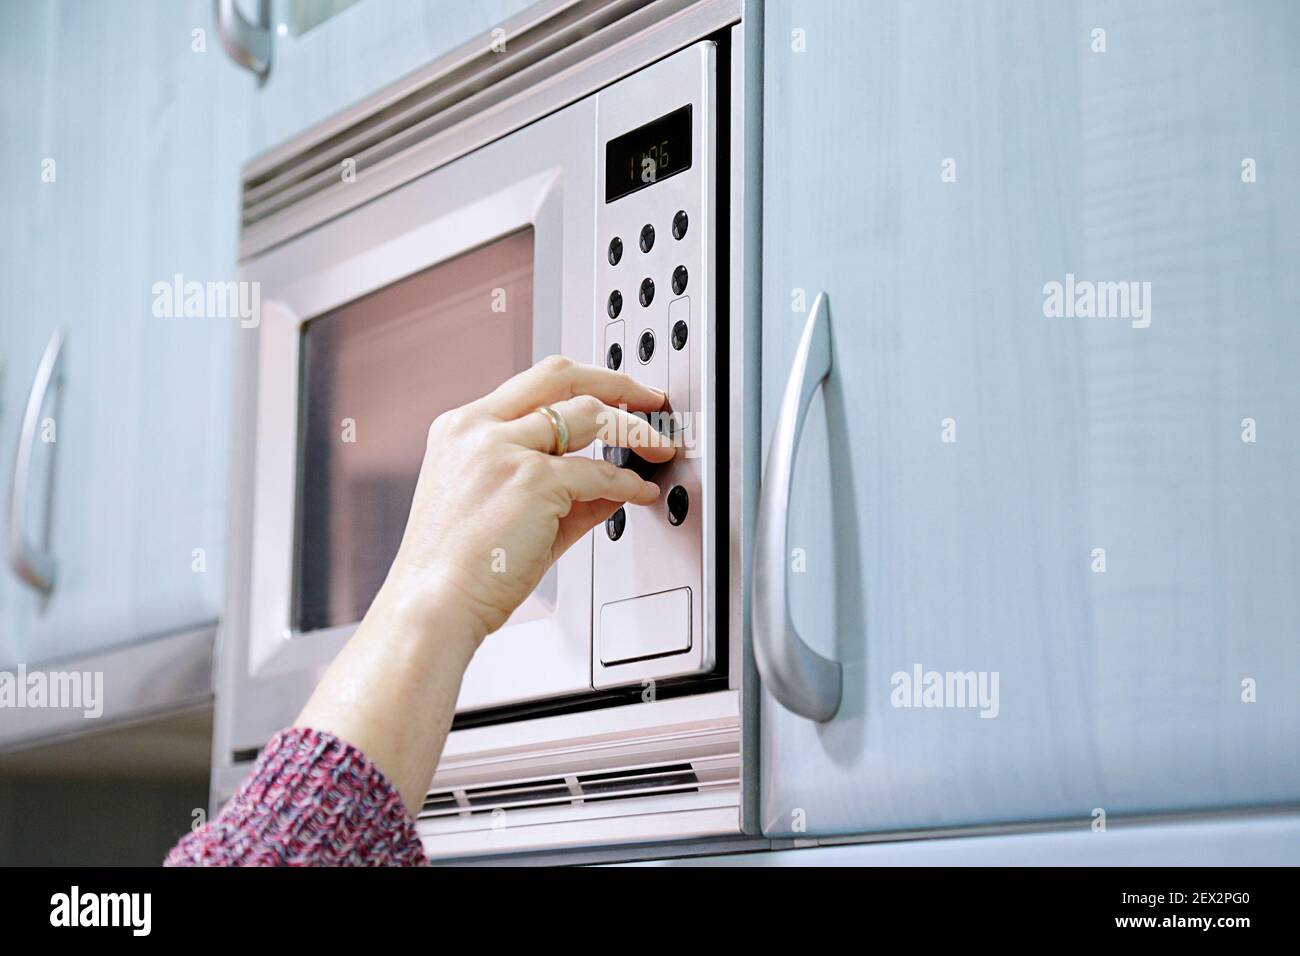 Woman using microwave oven at home. Stock Photo